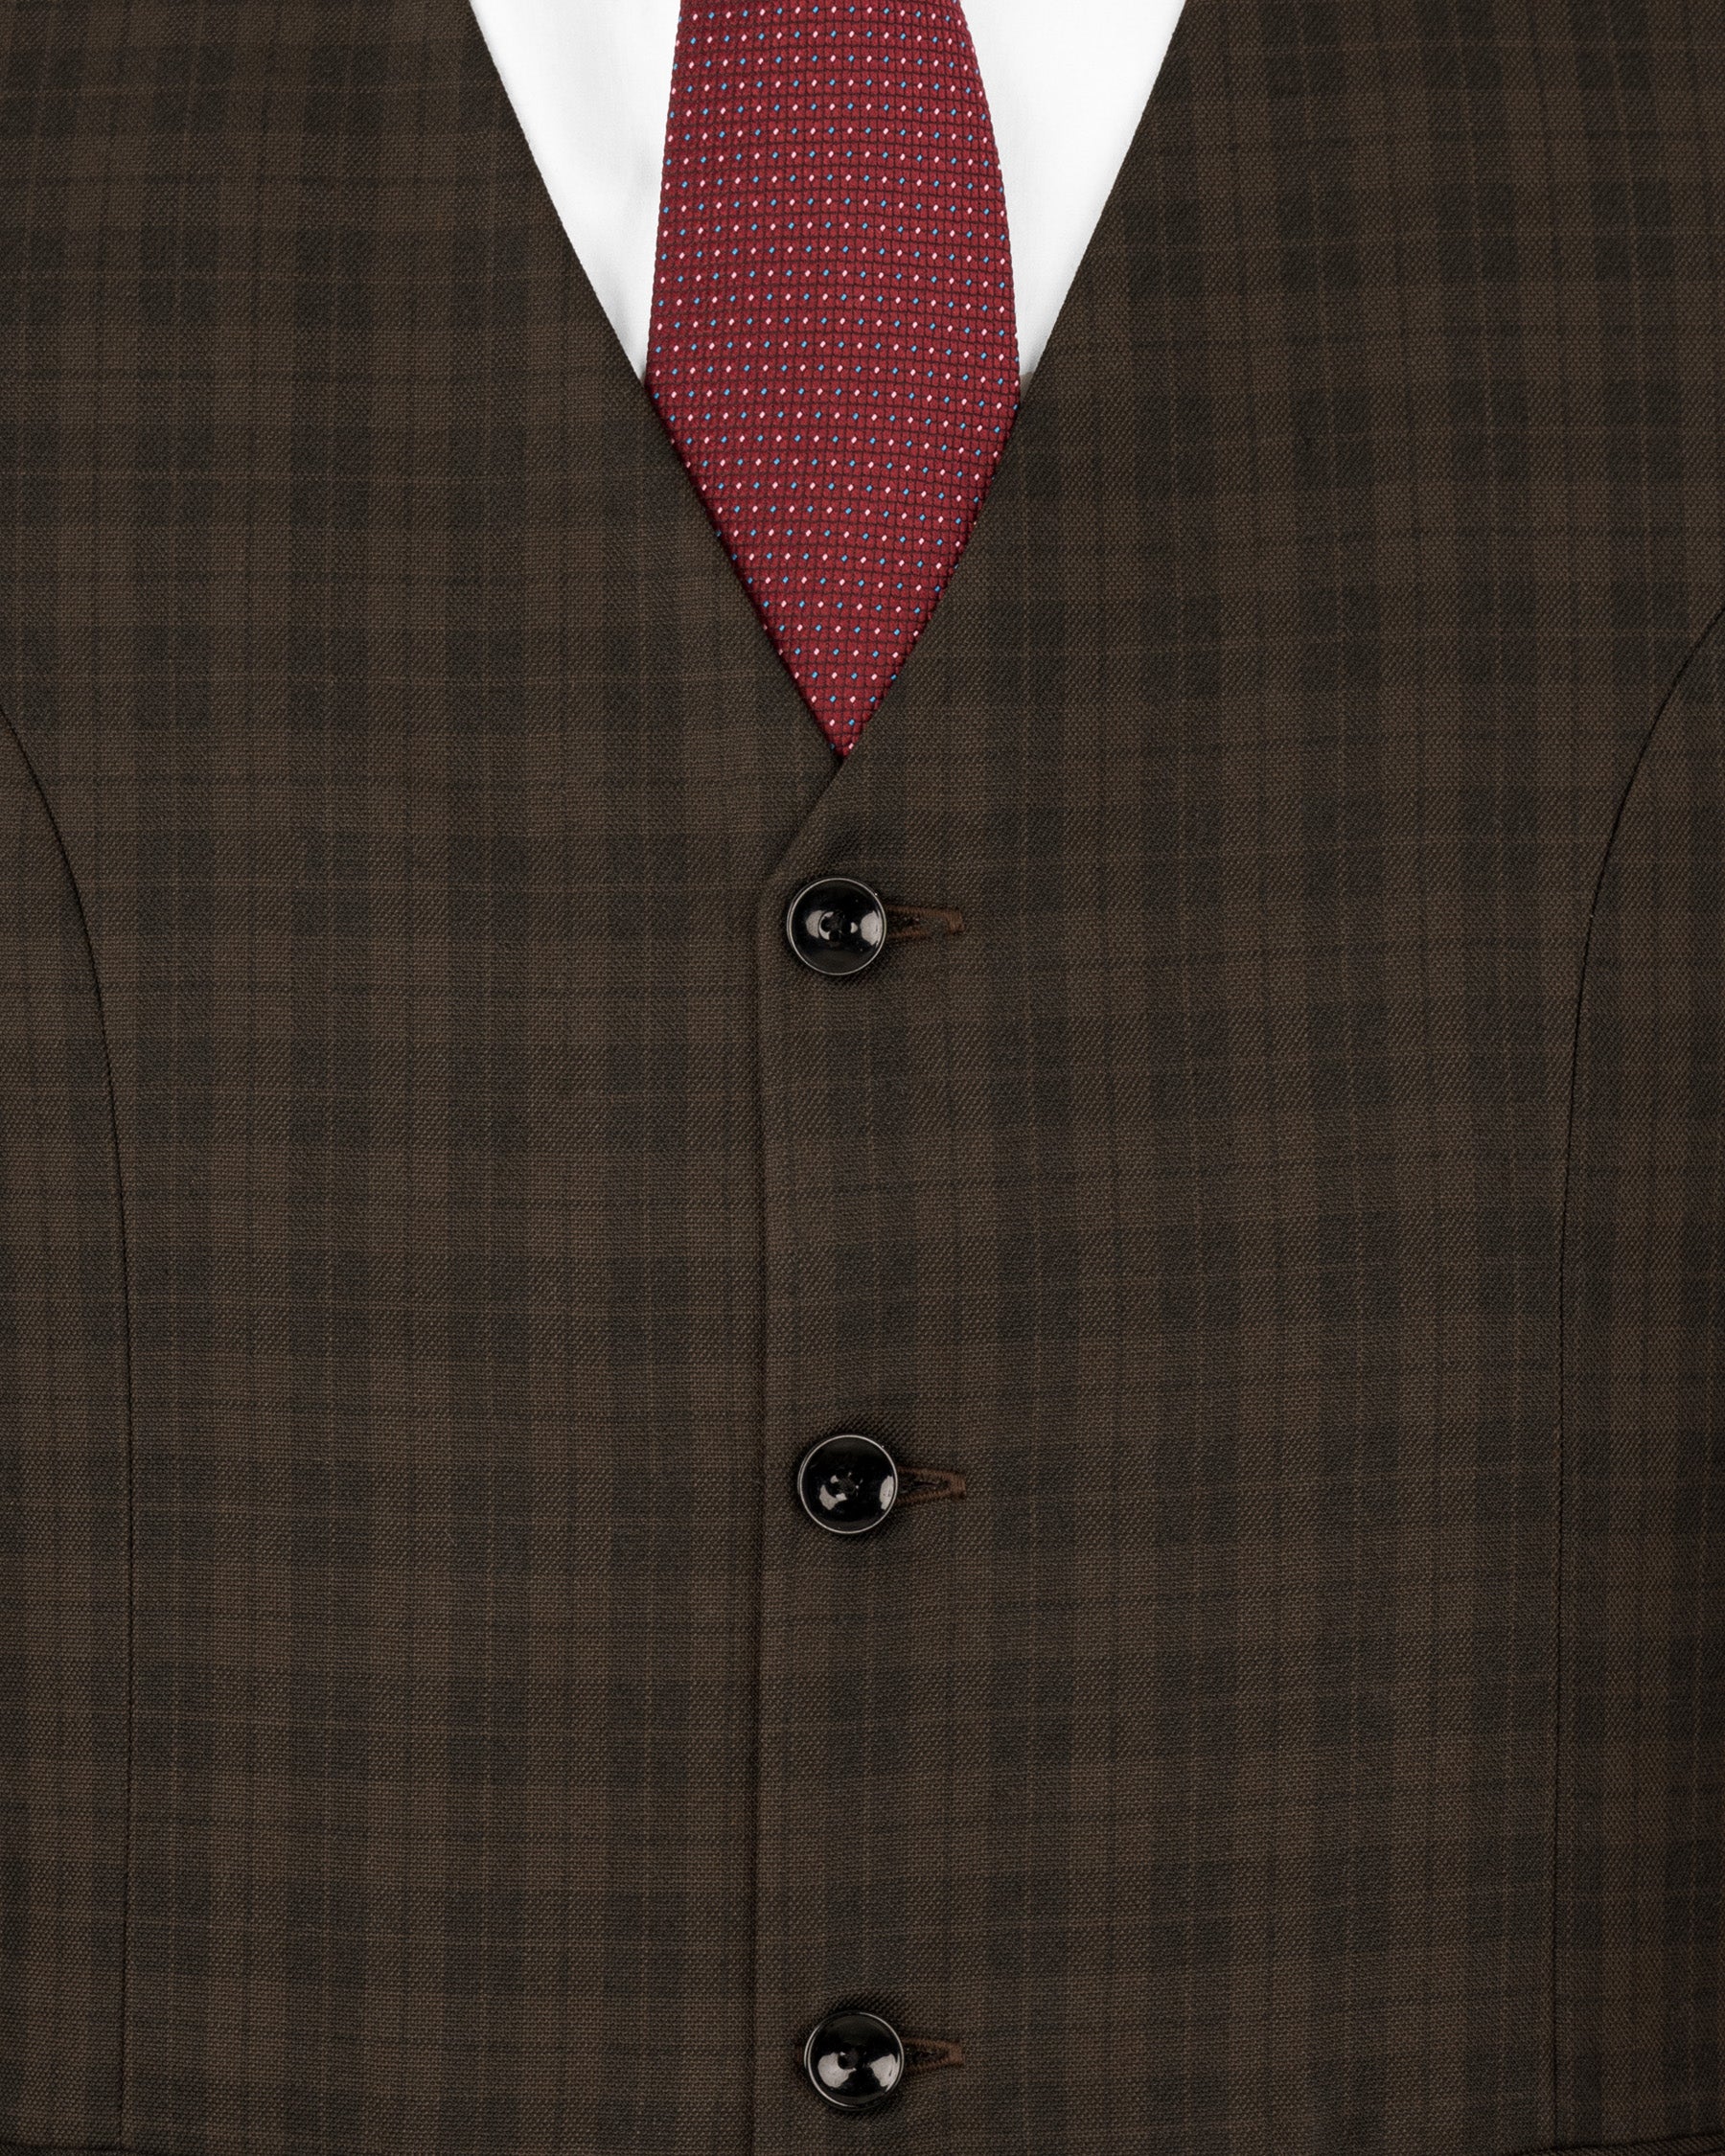 Armadillo Brown Plaid Double-breasted Suit ST1755-DB-36, ST1755-DB-38, ST1755-DB-40, ST1755-DB-42, ST1755-DB-44, ST1755-DB-46, ST1755-DB-48, ST1755-DB-50, ST1755-DB-52, ST1755-DB-54, ST1755-DB-56, ST1755-DB-58, ST1755-DB-60